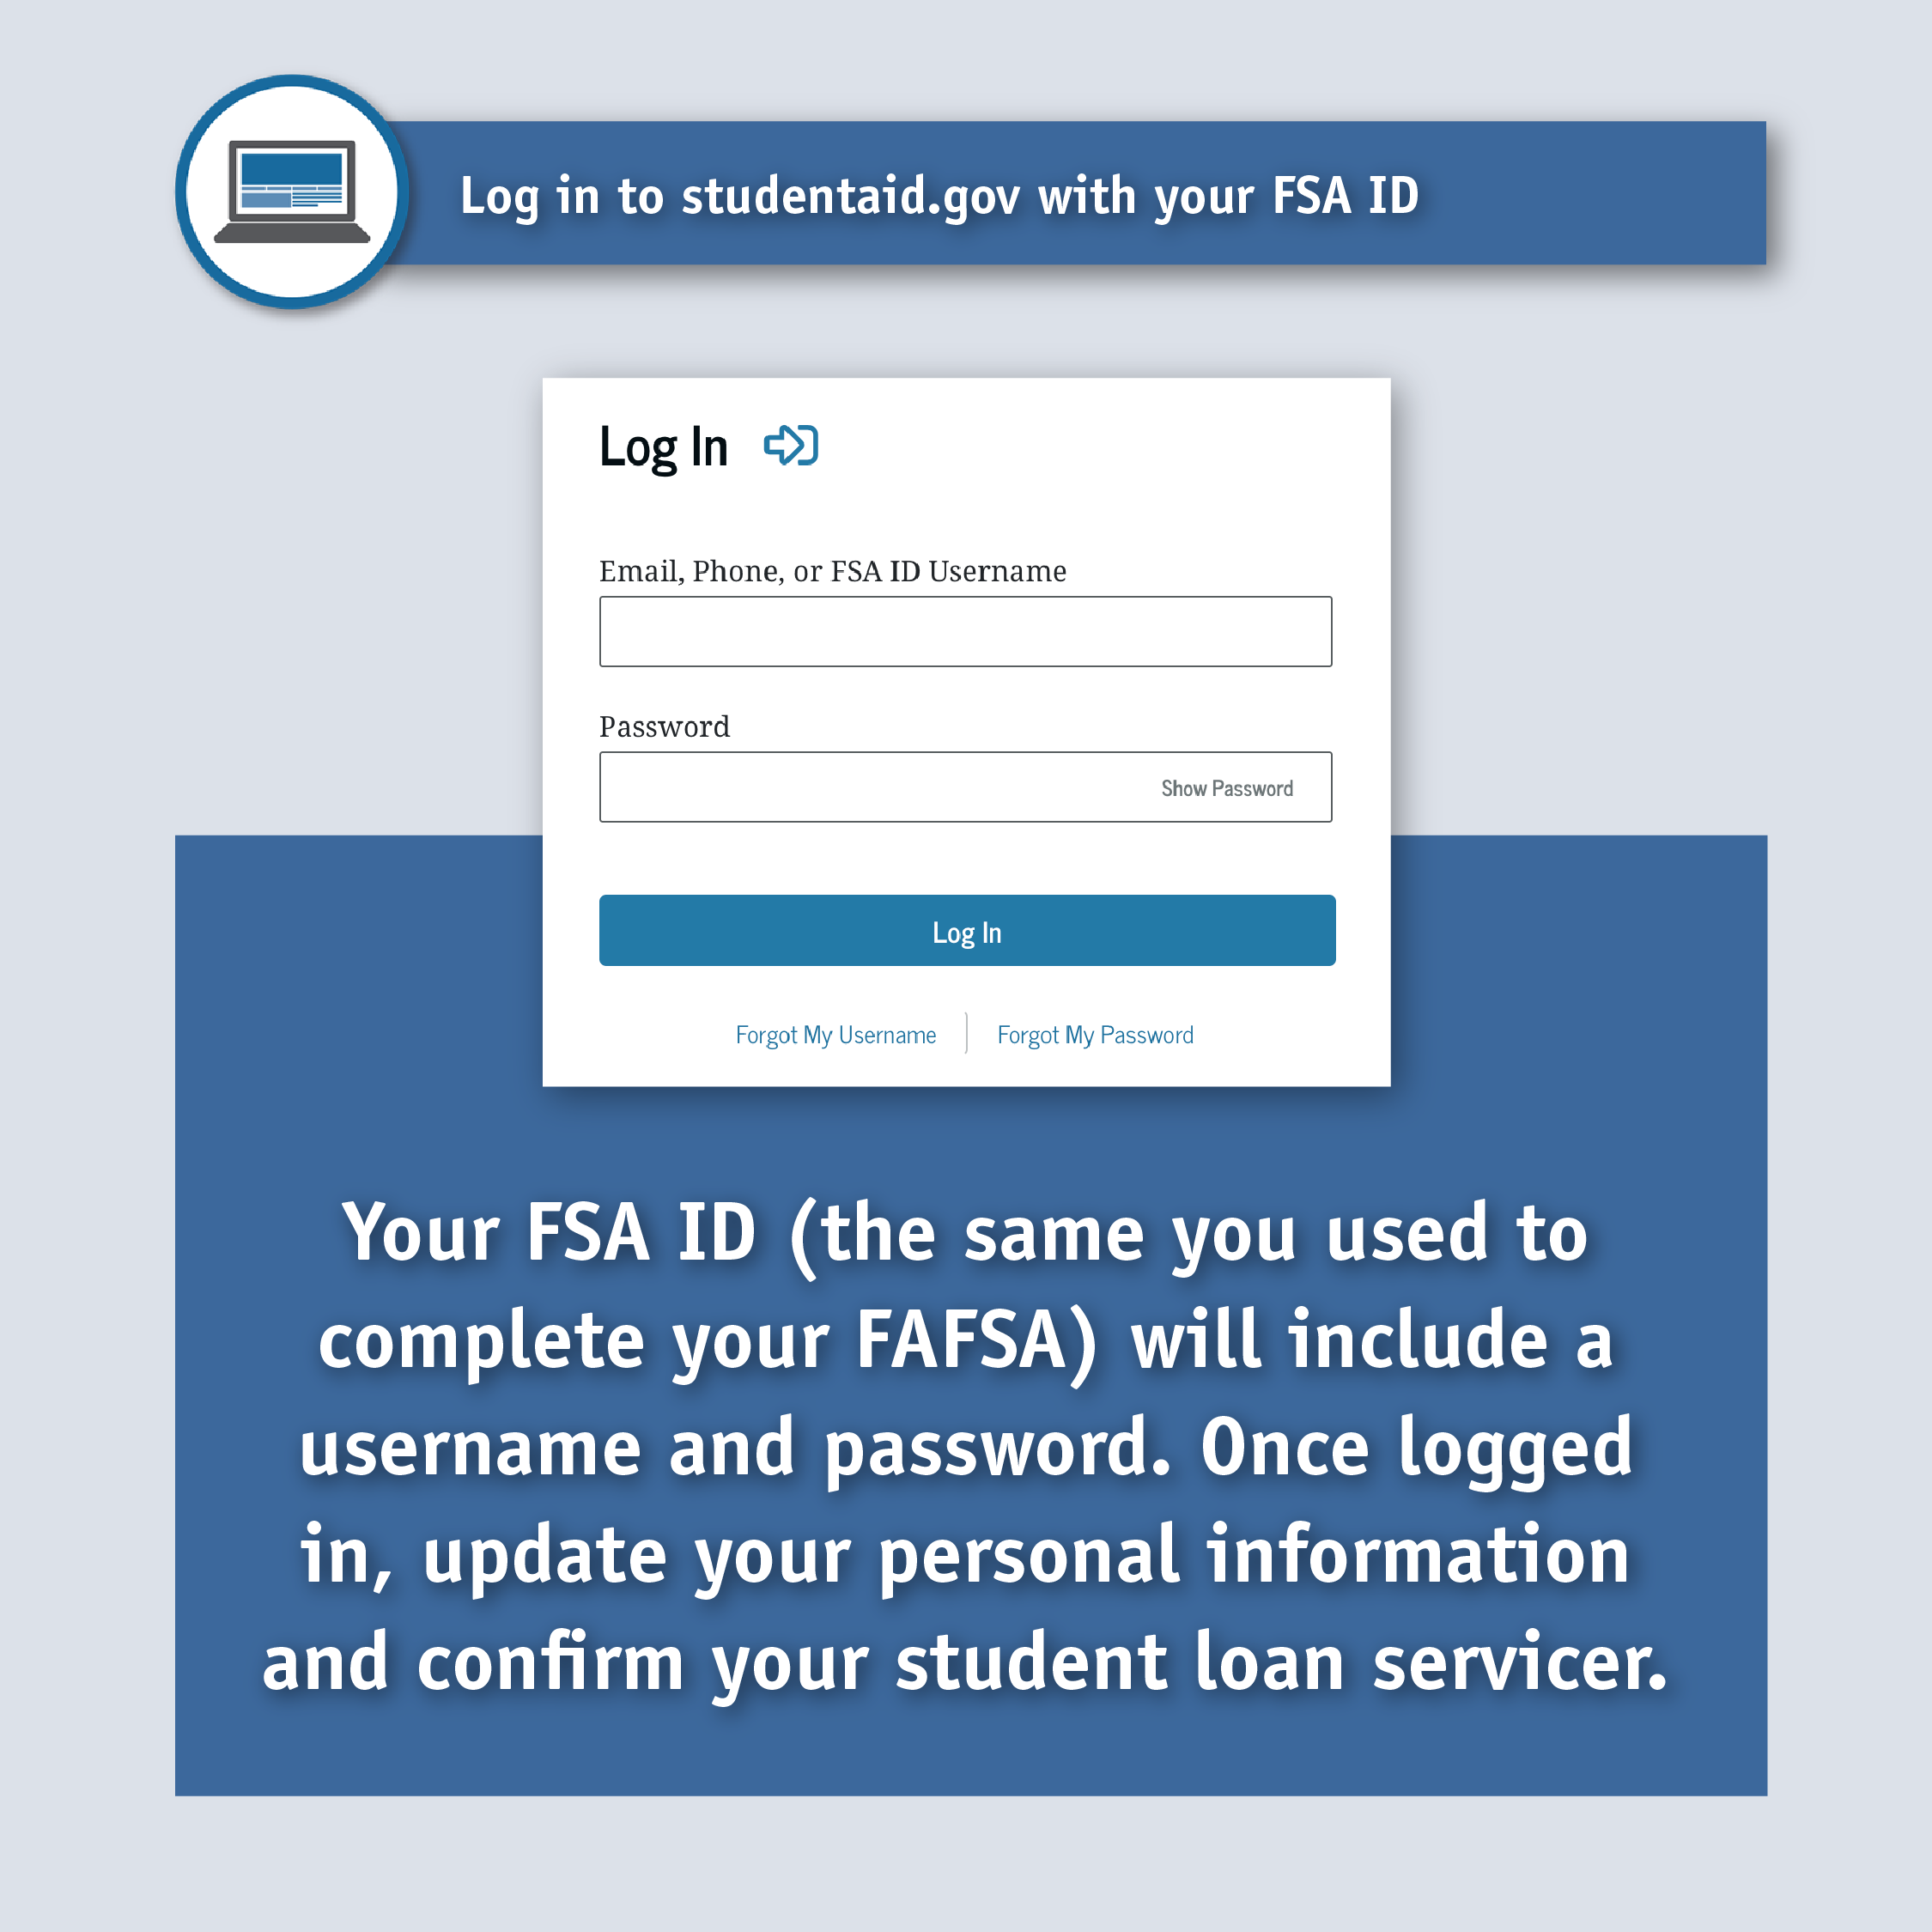 Log in to studentaid.gov with your FSA ID. Login window. Text: Your FSA ID (the same you used to complete your FAFSA) will include a username and password. Once logged in, update your personal information and confirm your student loan servicer.